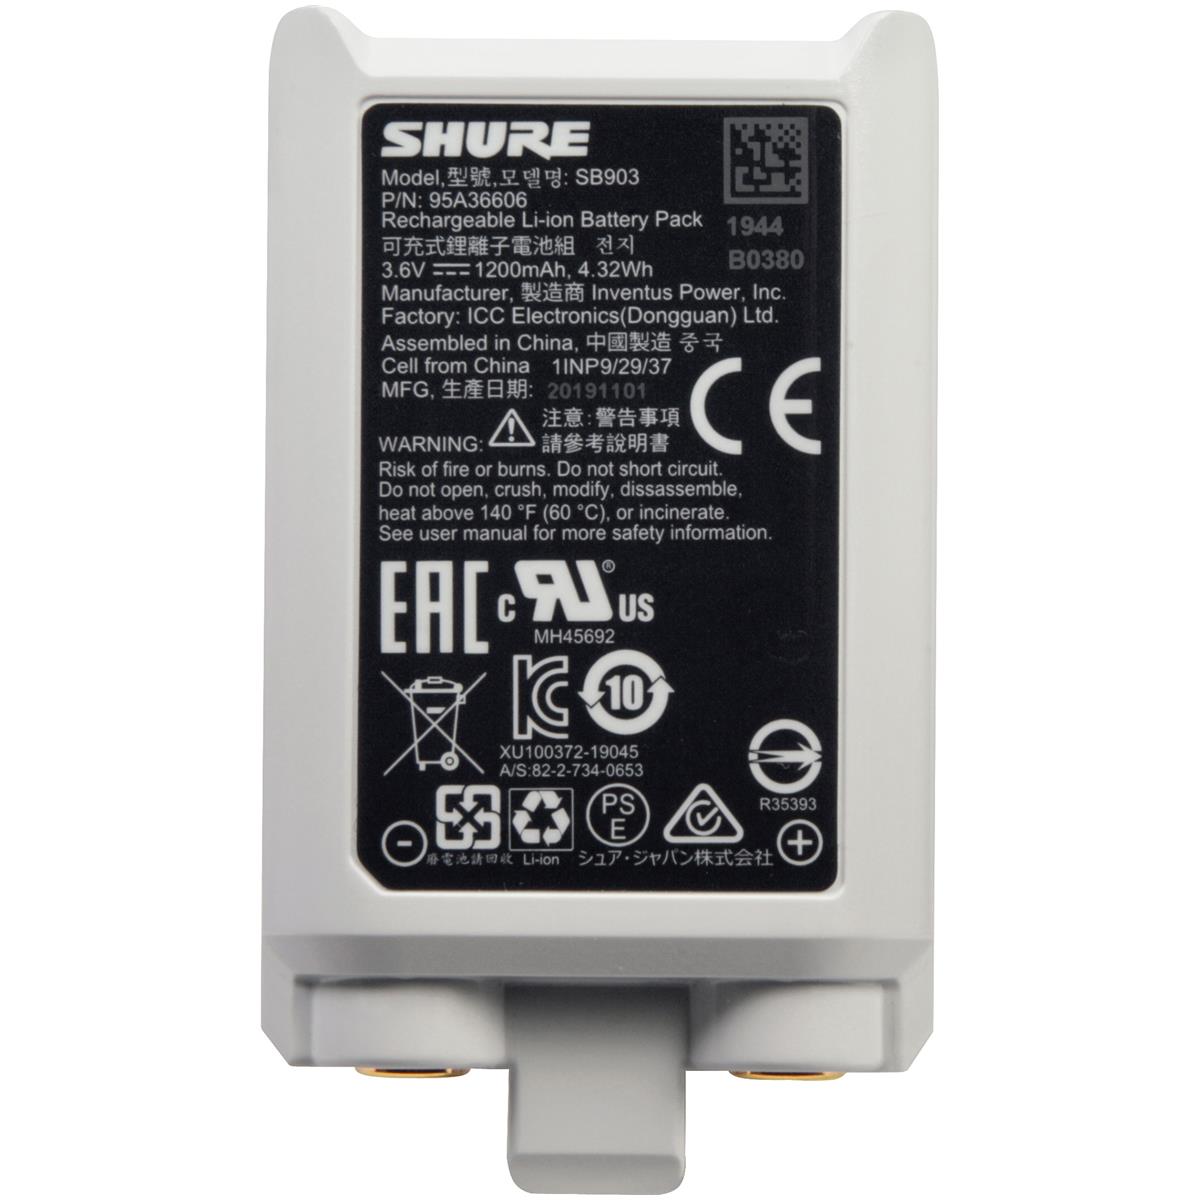 Image of Shure SB903 Lithium-Ion Rechargeable Battery for SLX-D